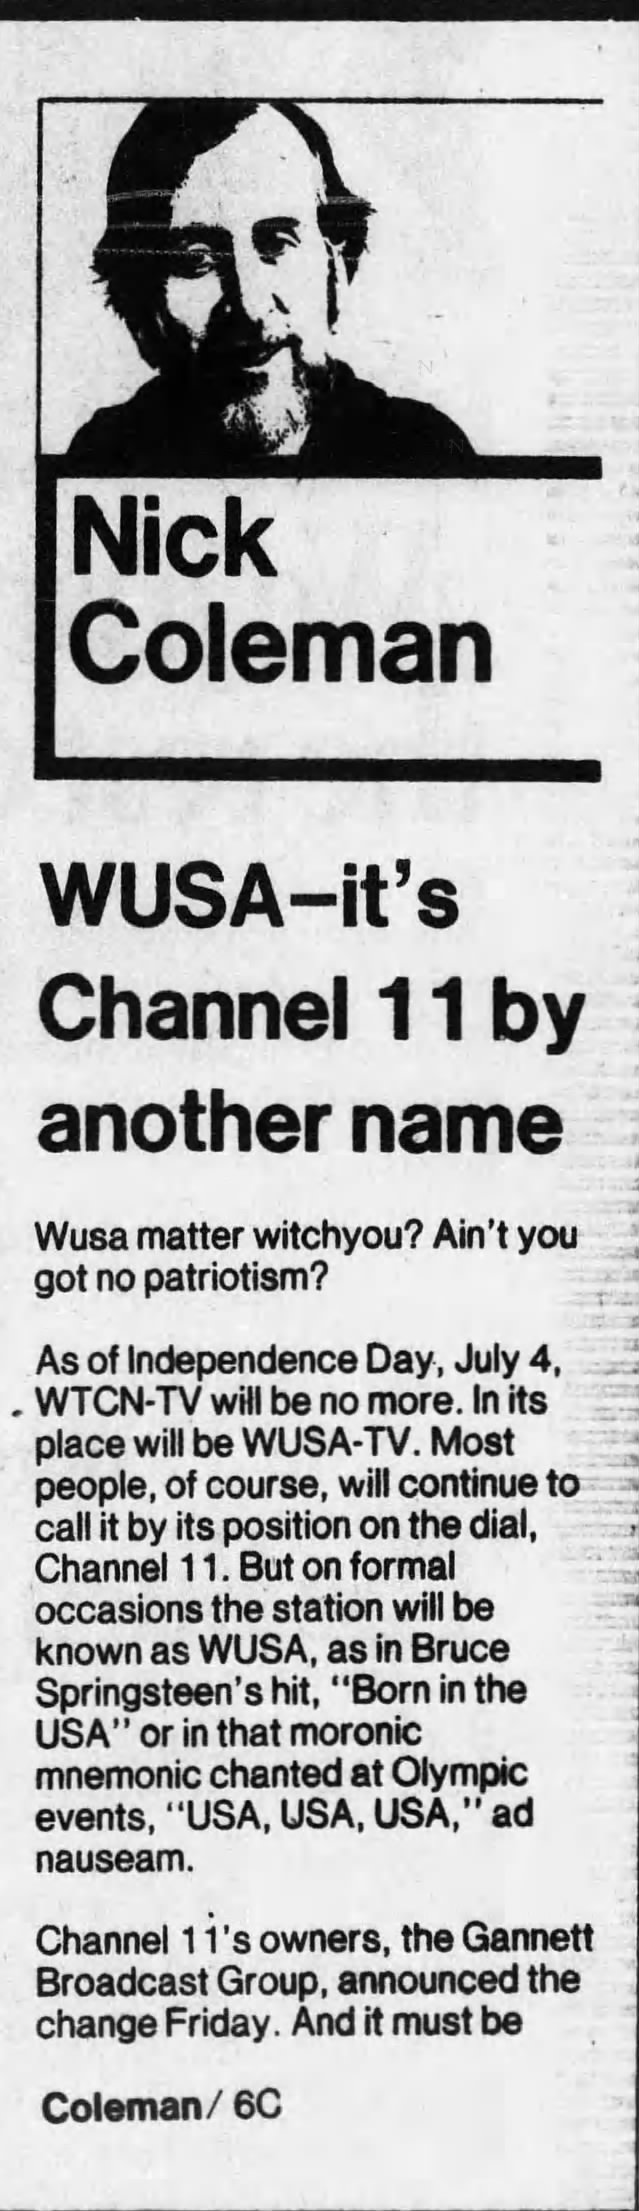 WUSA—it's Channel 11 by another name